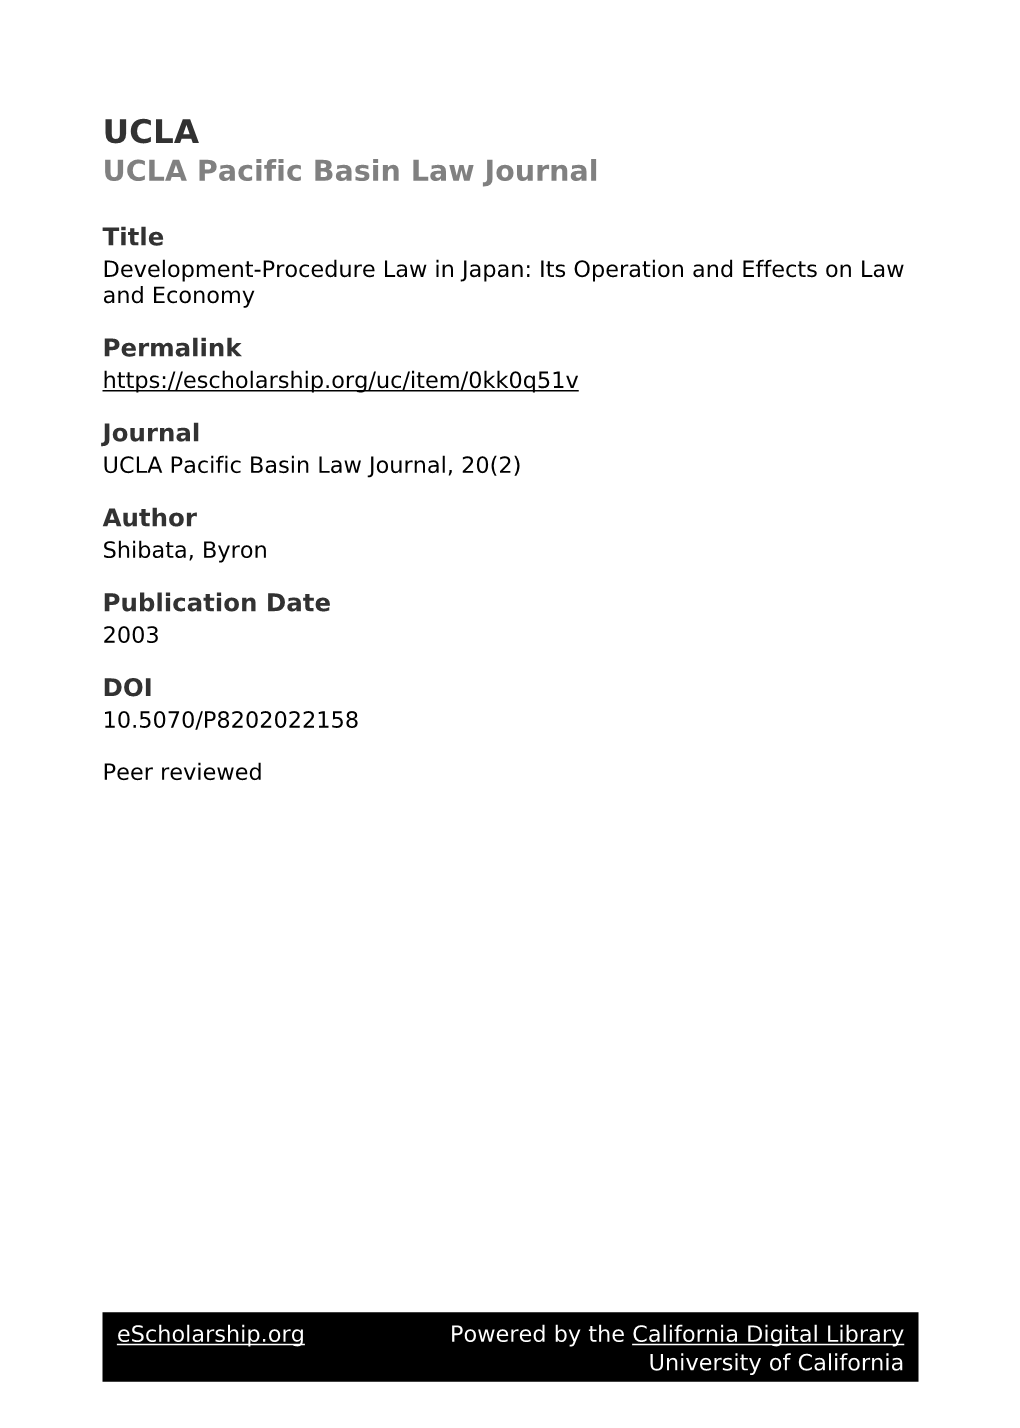 Development-Procedure Law in Japan: Its Operation and Effects on Law and Economy